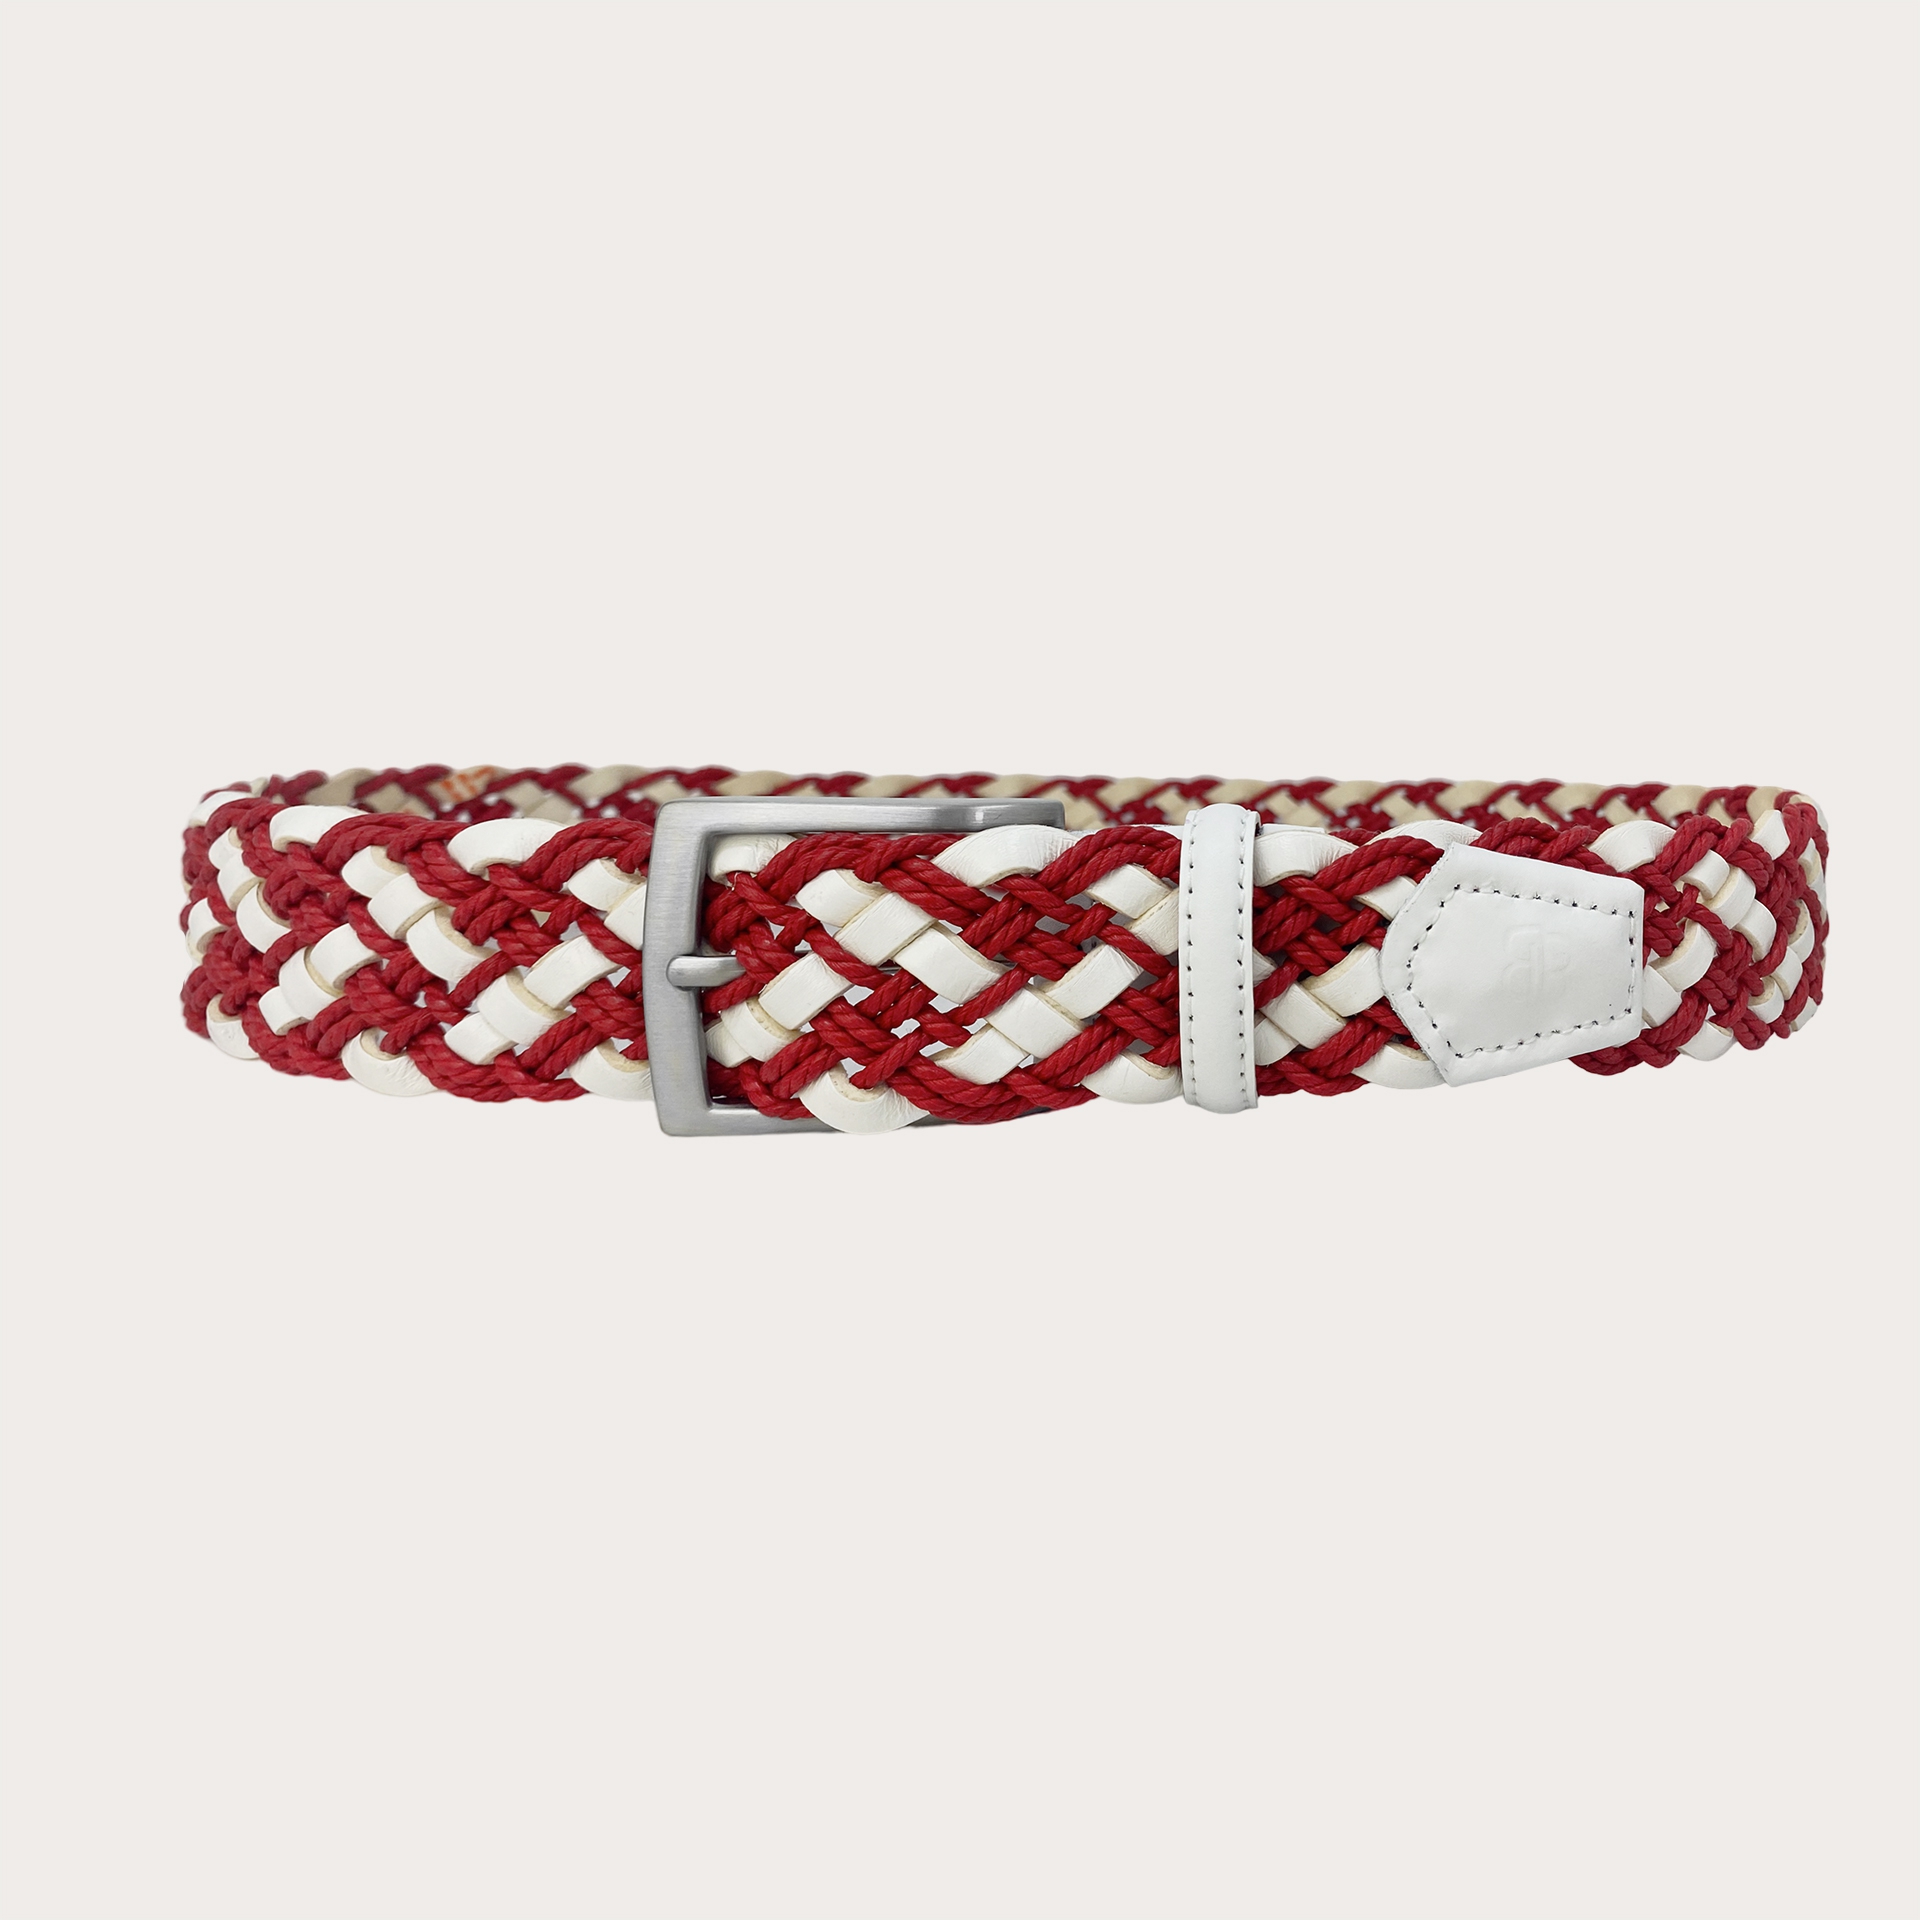 BRUCLE Red and white braided belt in leather and cotton